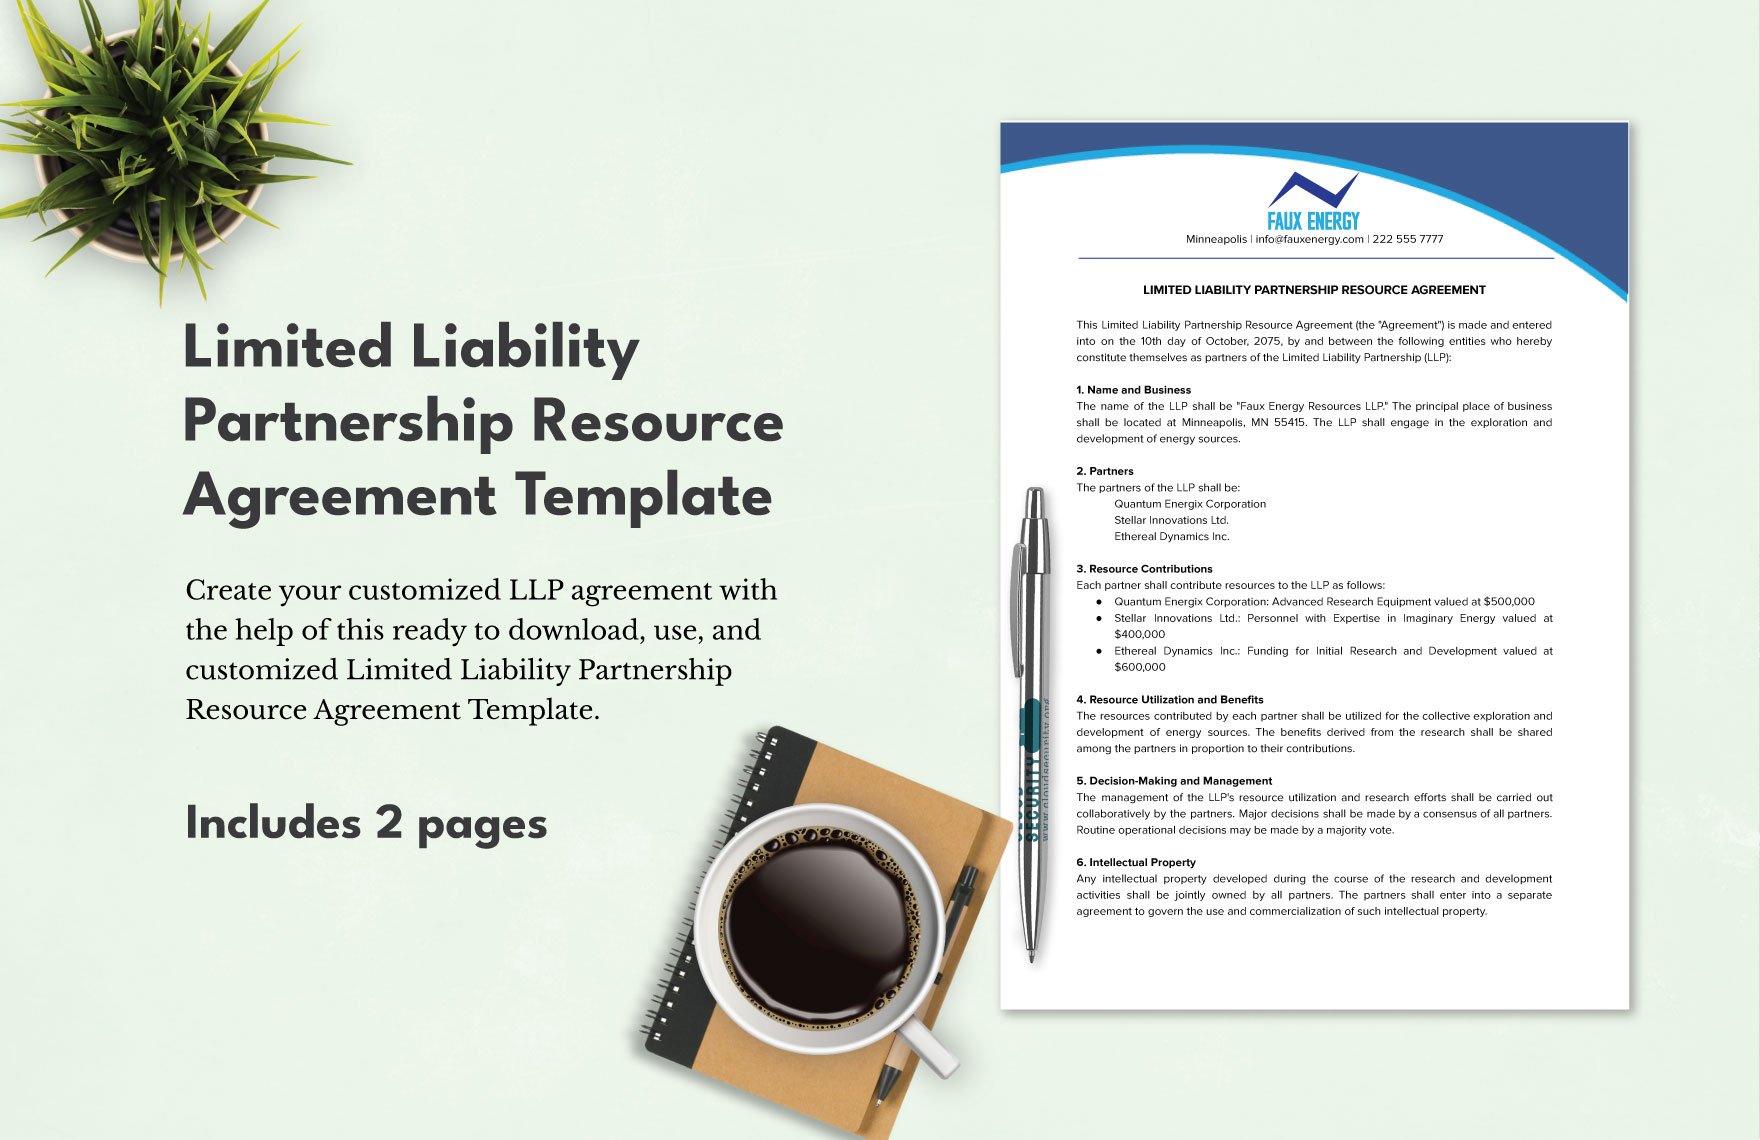 Limited Liability Partnership Resource Agreement Template